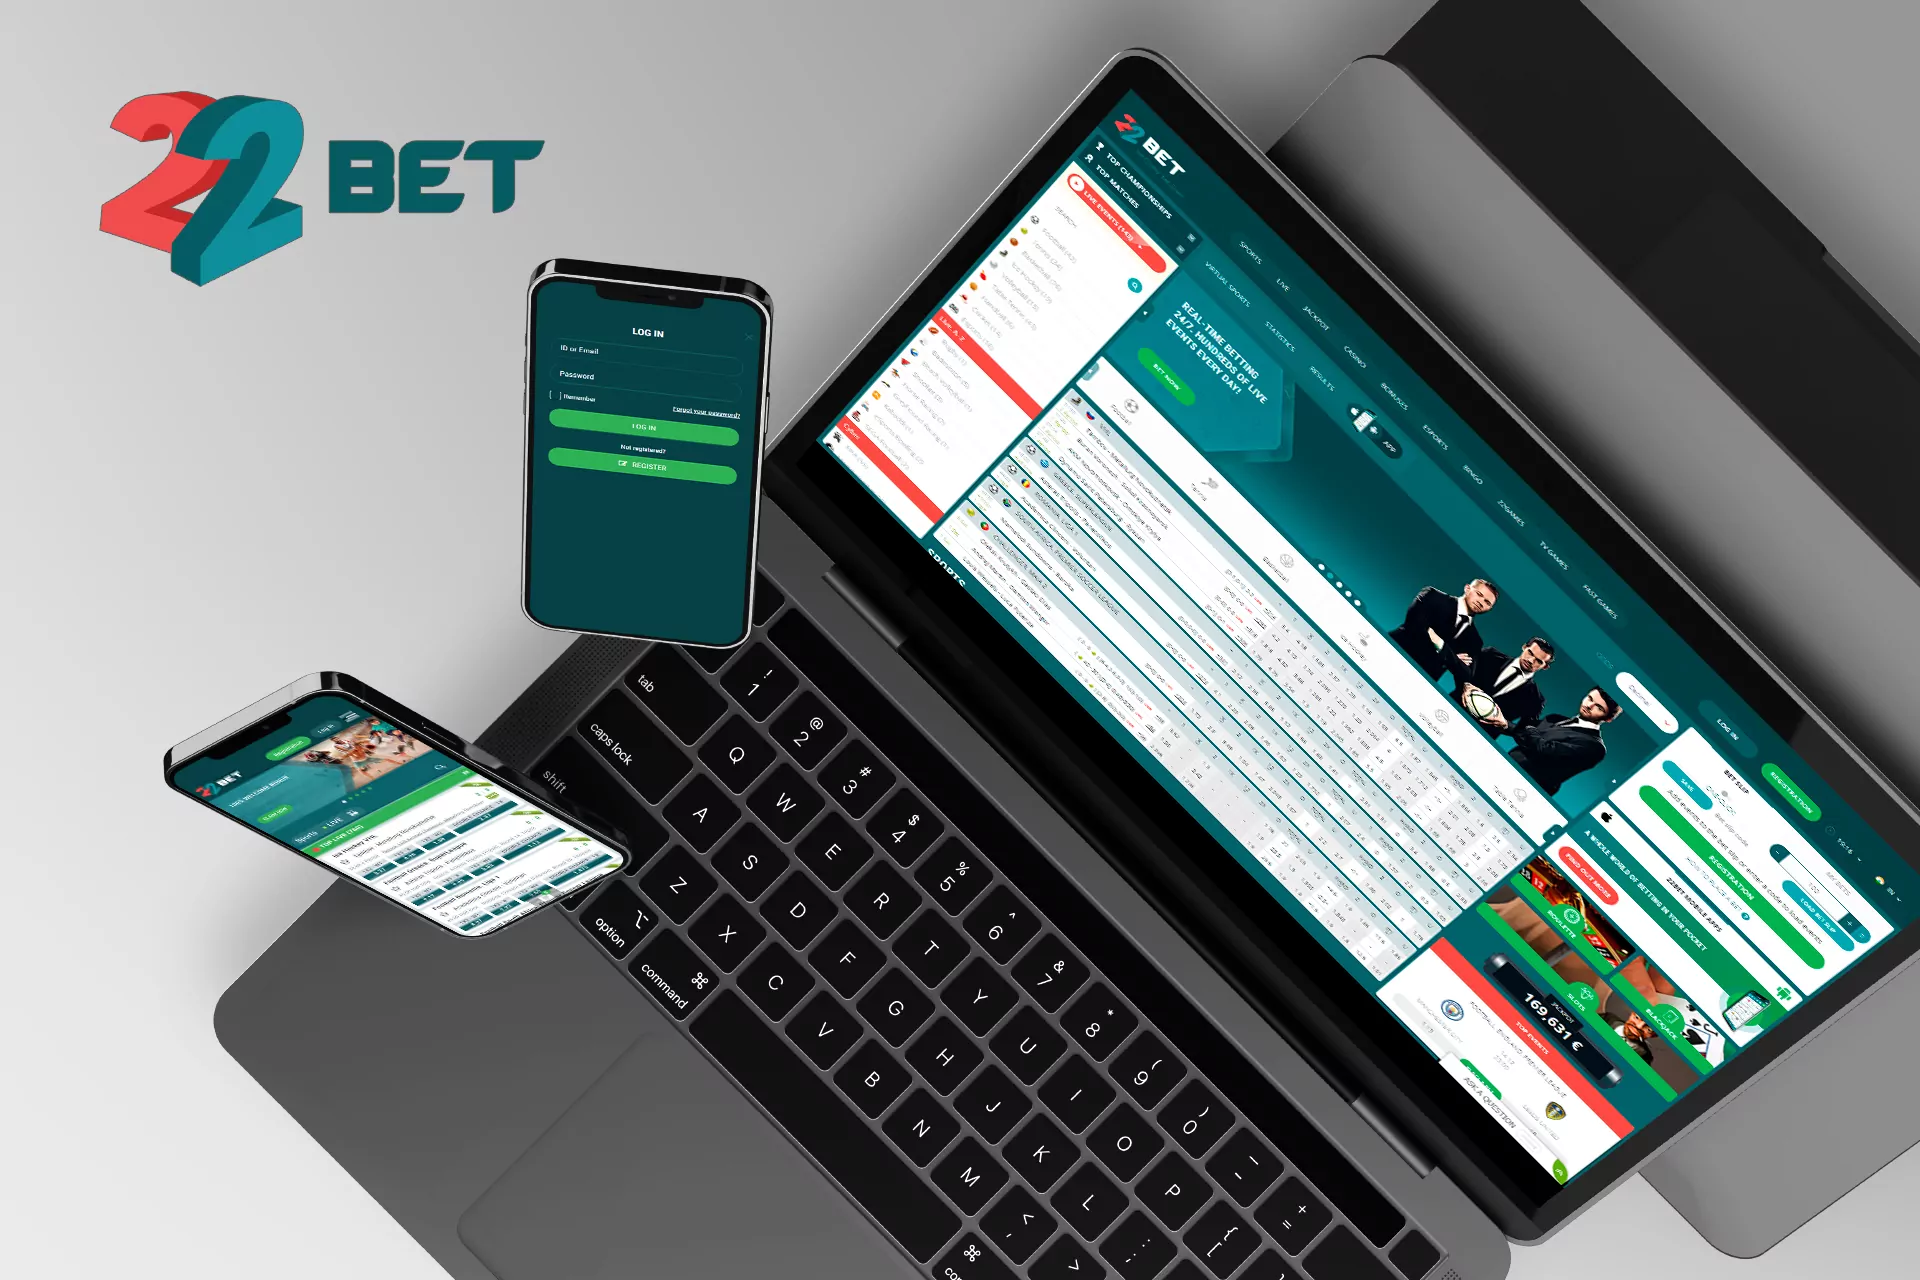 At 22bet you can place bets on cricket and other sports events.